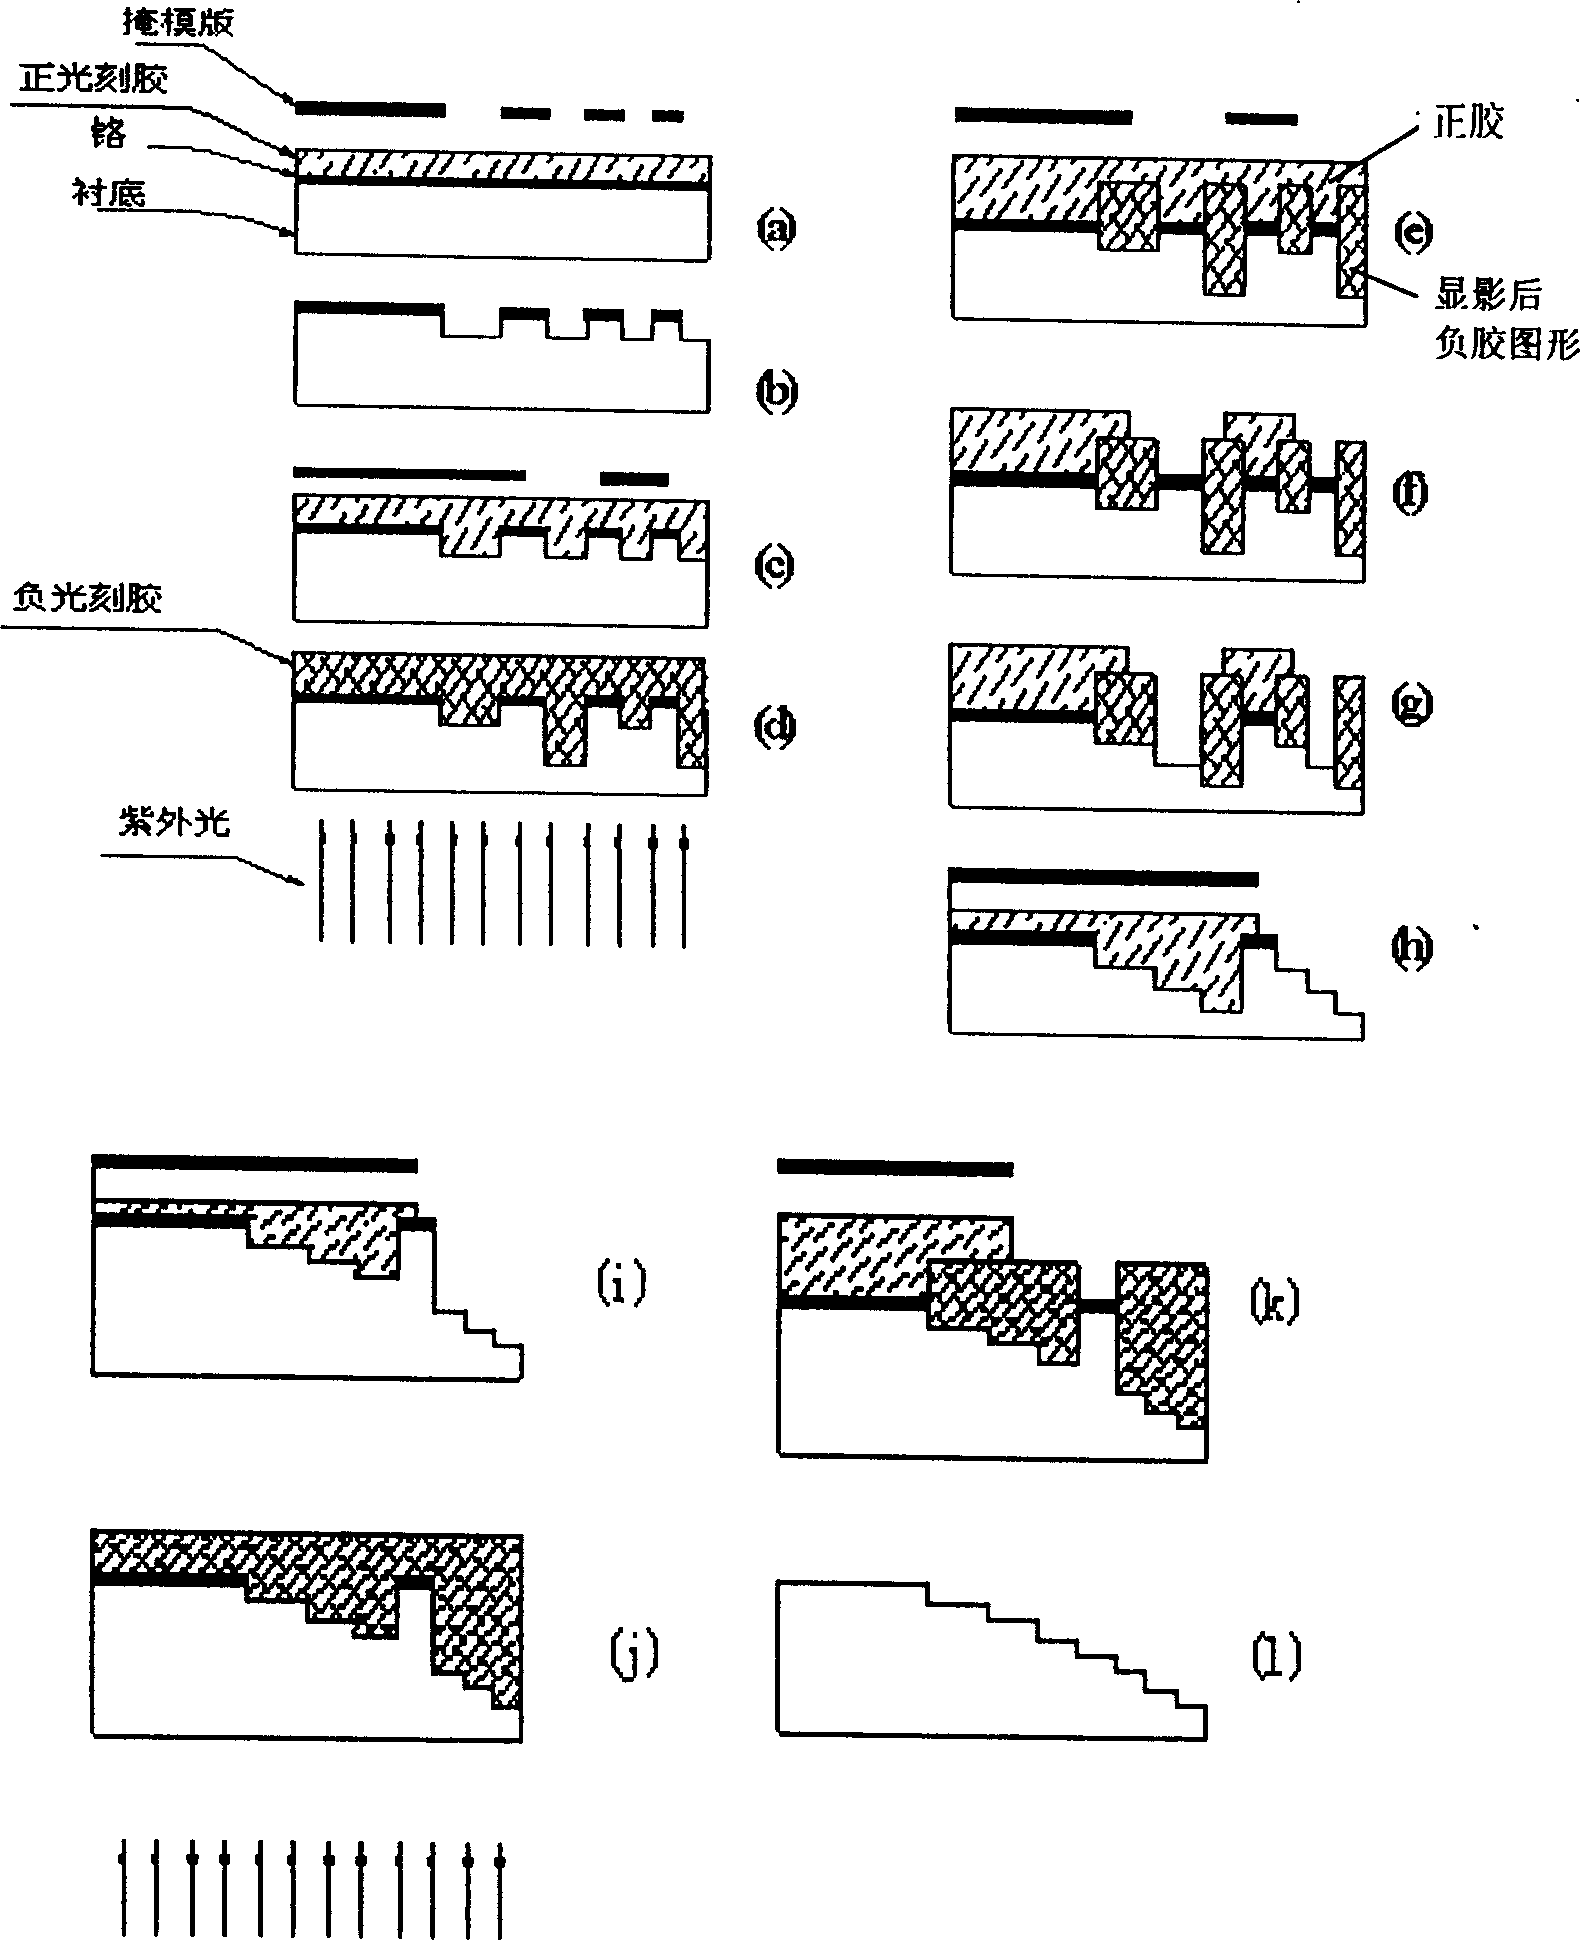 Process for mfg. multi-phase diffraction optic element